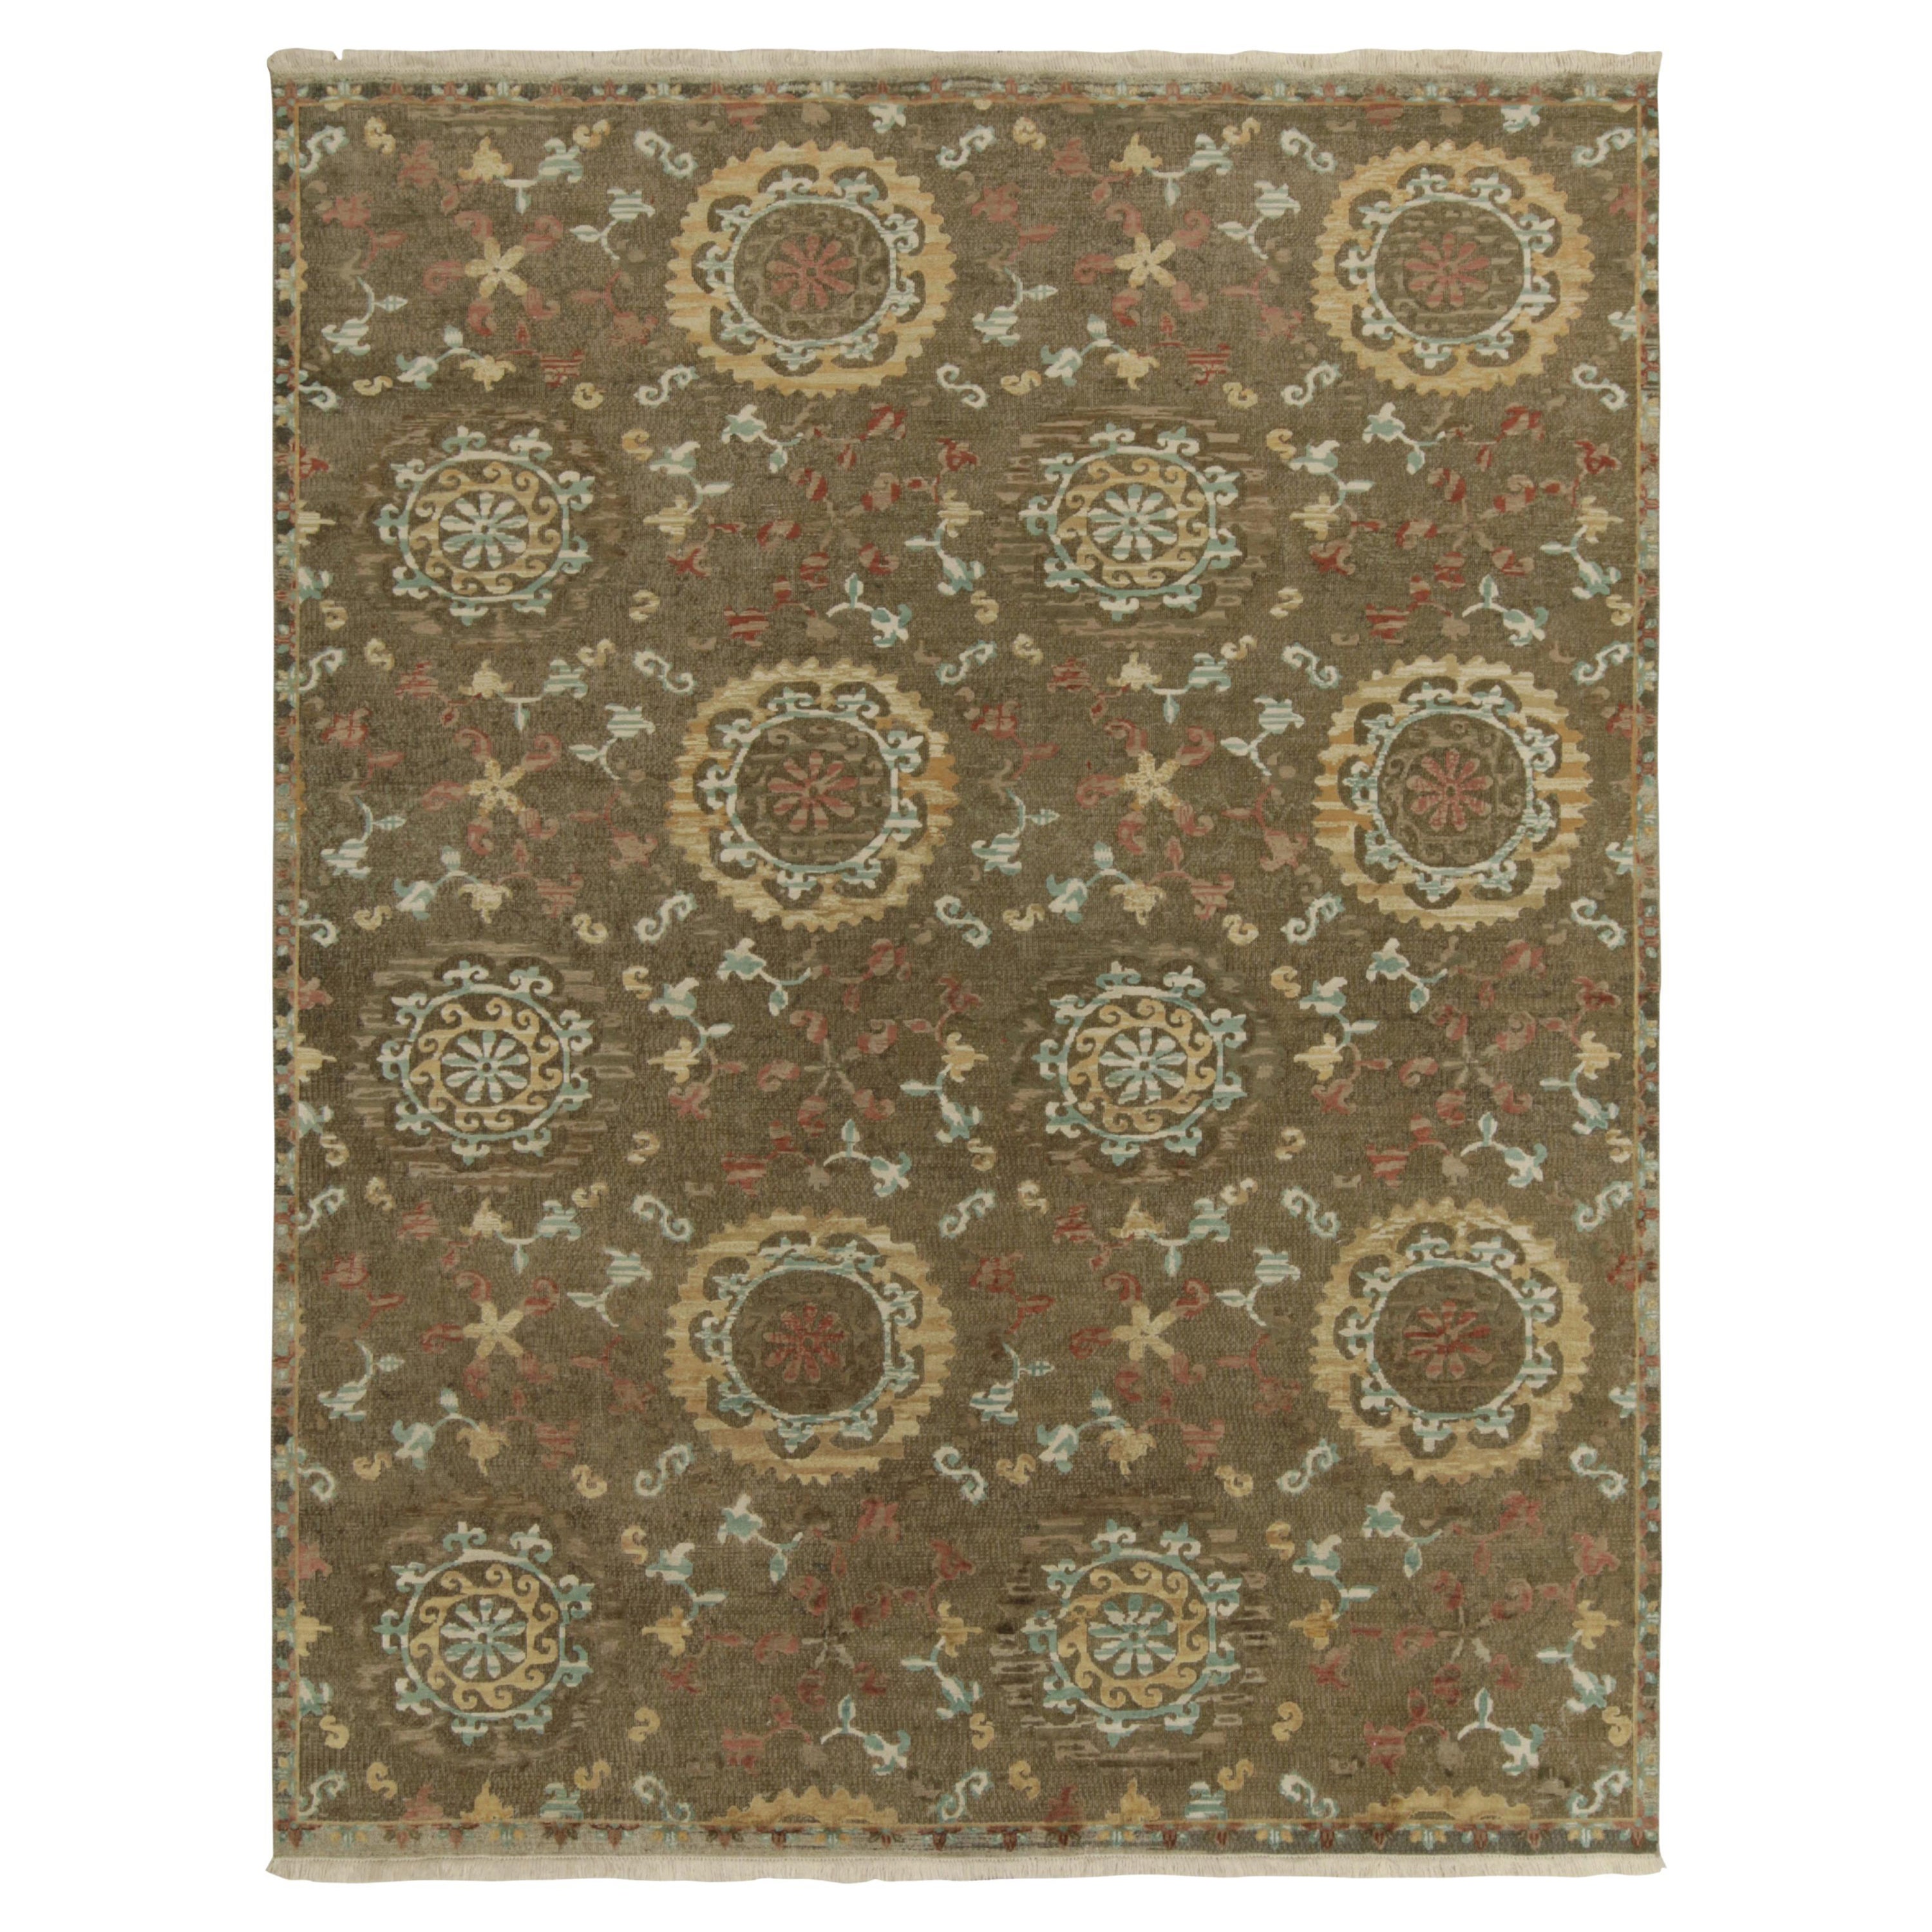 Rug & Kilim’s Classic Spanish Style Rug in Beige-Brown, Gold & Blue Medallions For Sale